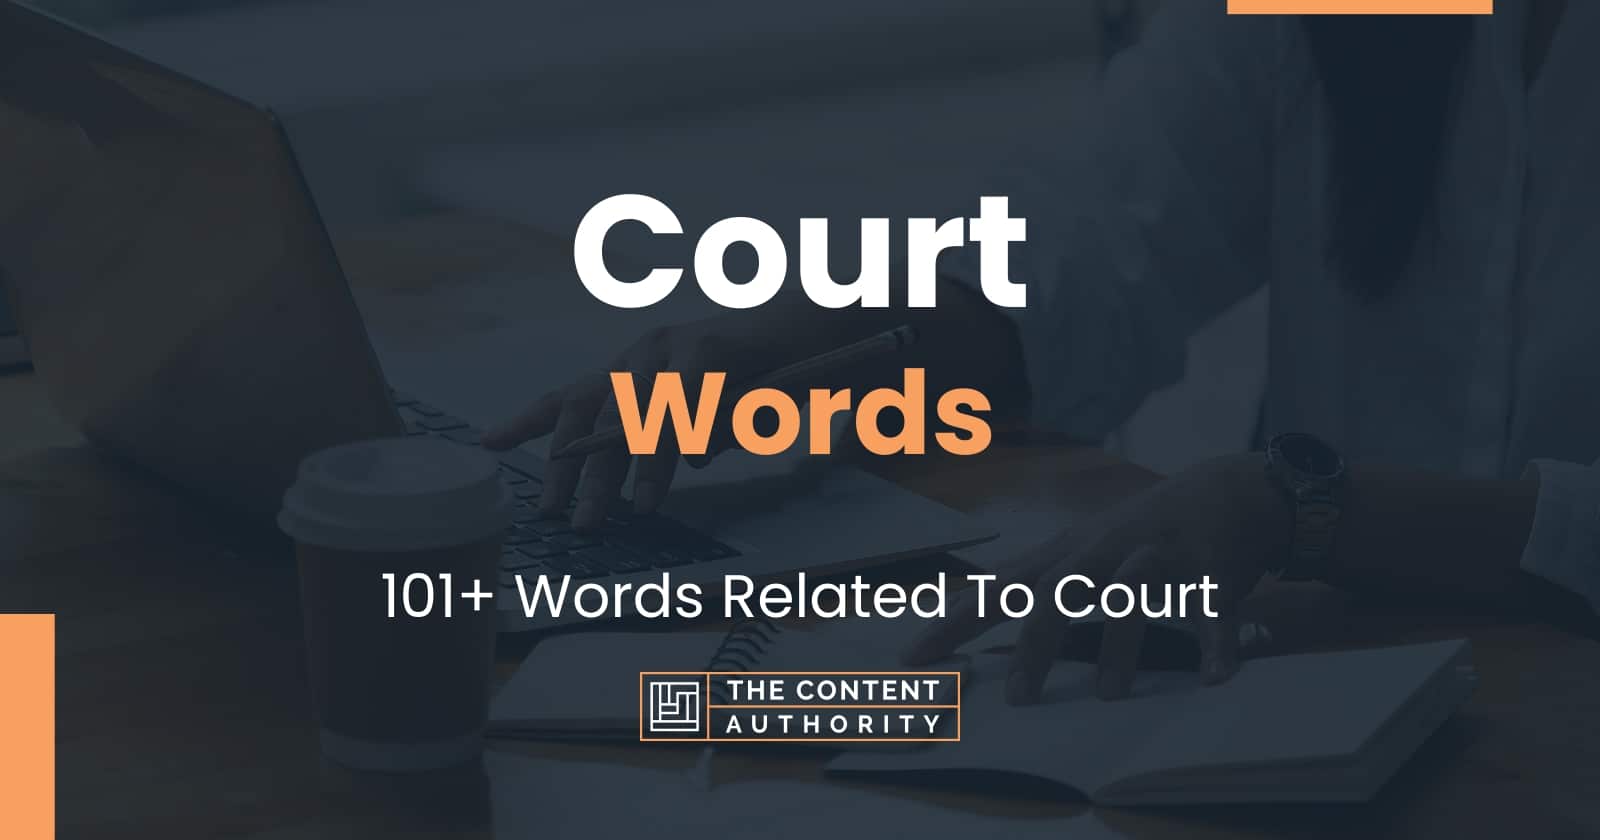 Court Words 101  Words Related To Court